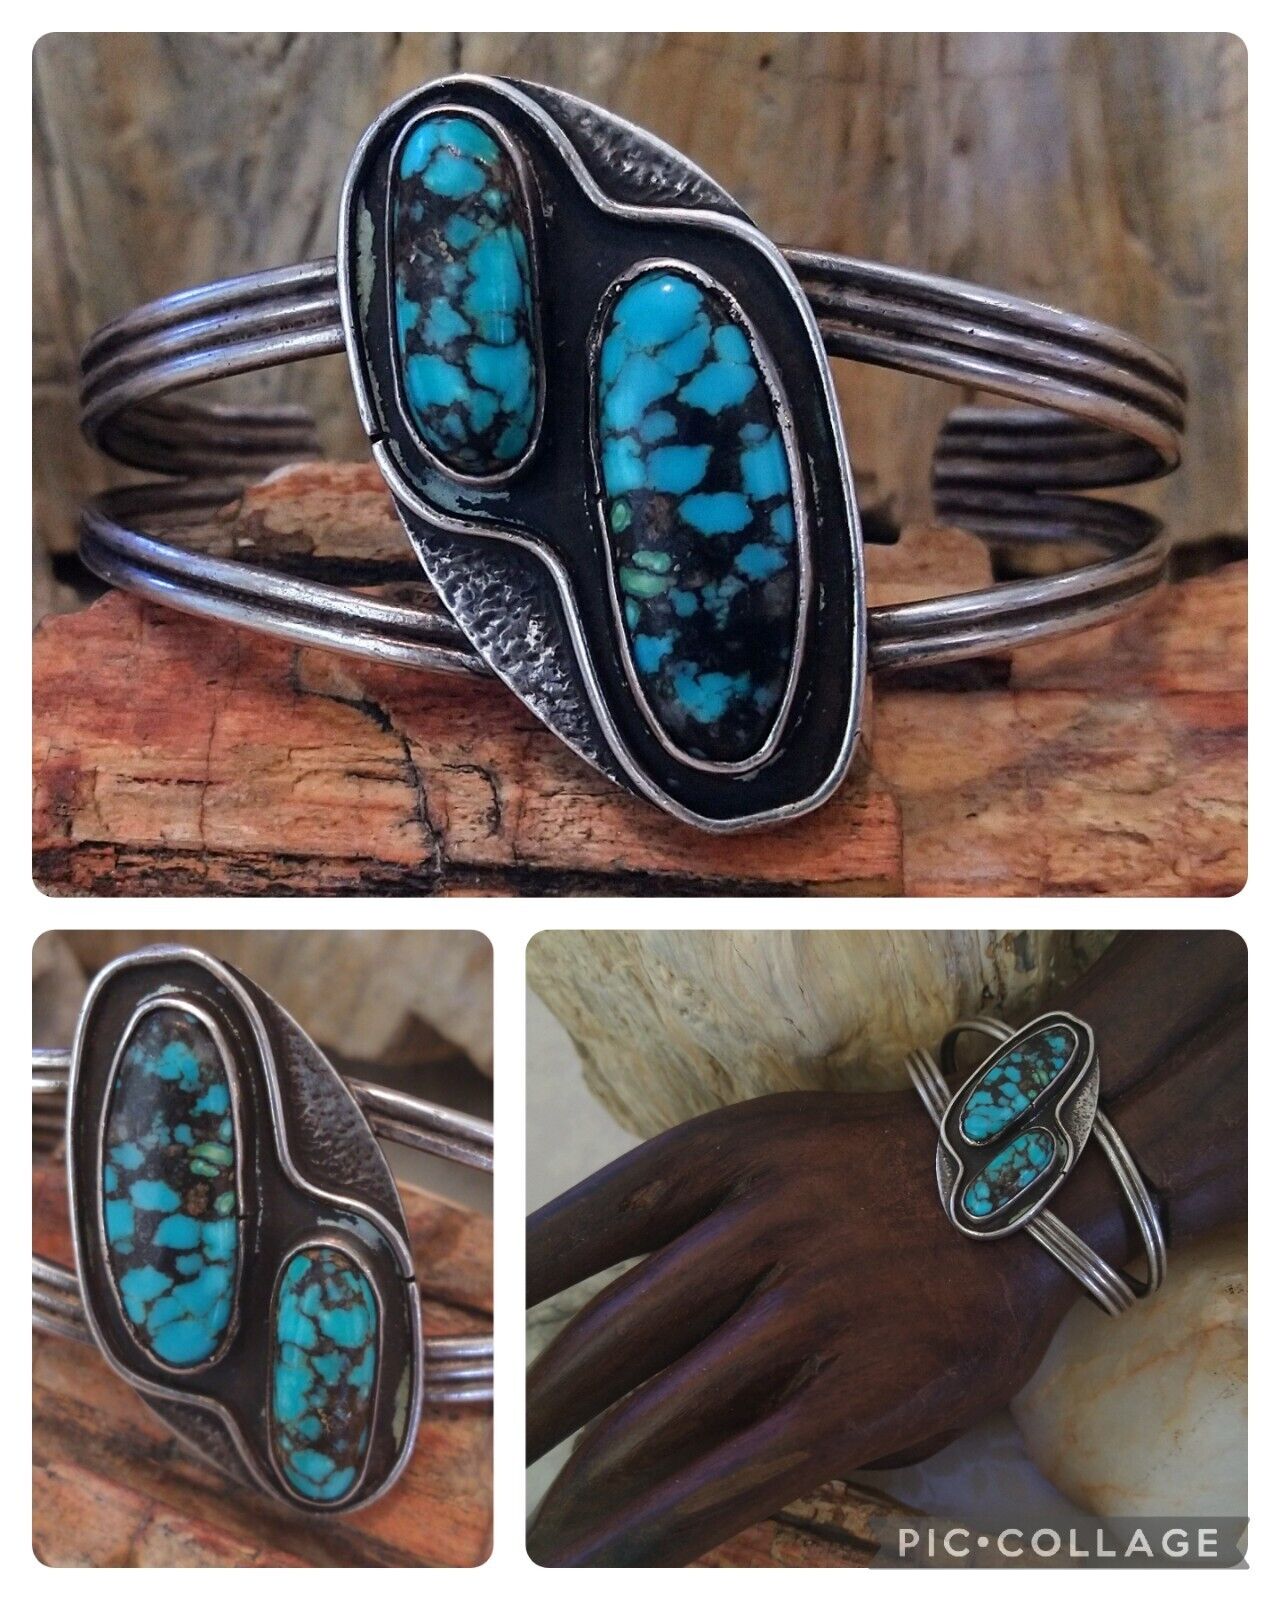 VINTAGE 1950’s Navajo “LONE MOUNTAIN TURQUOISE” Offset STERLING CUFF BRACELET